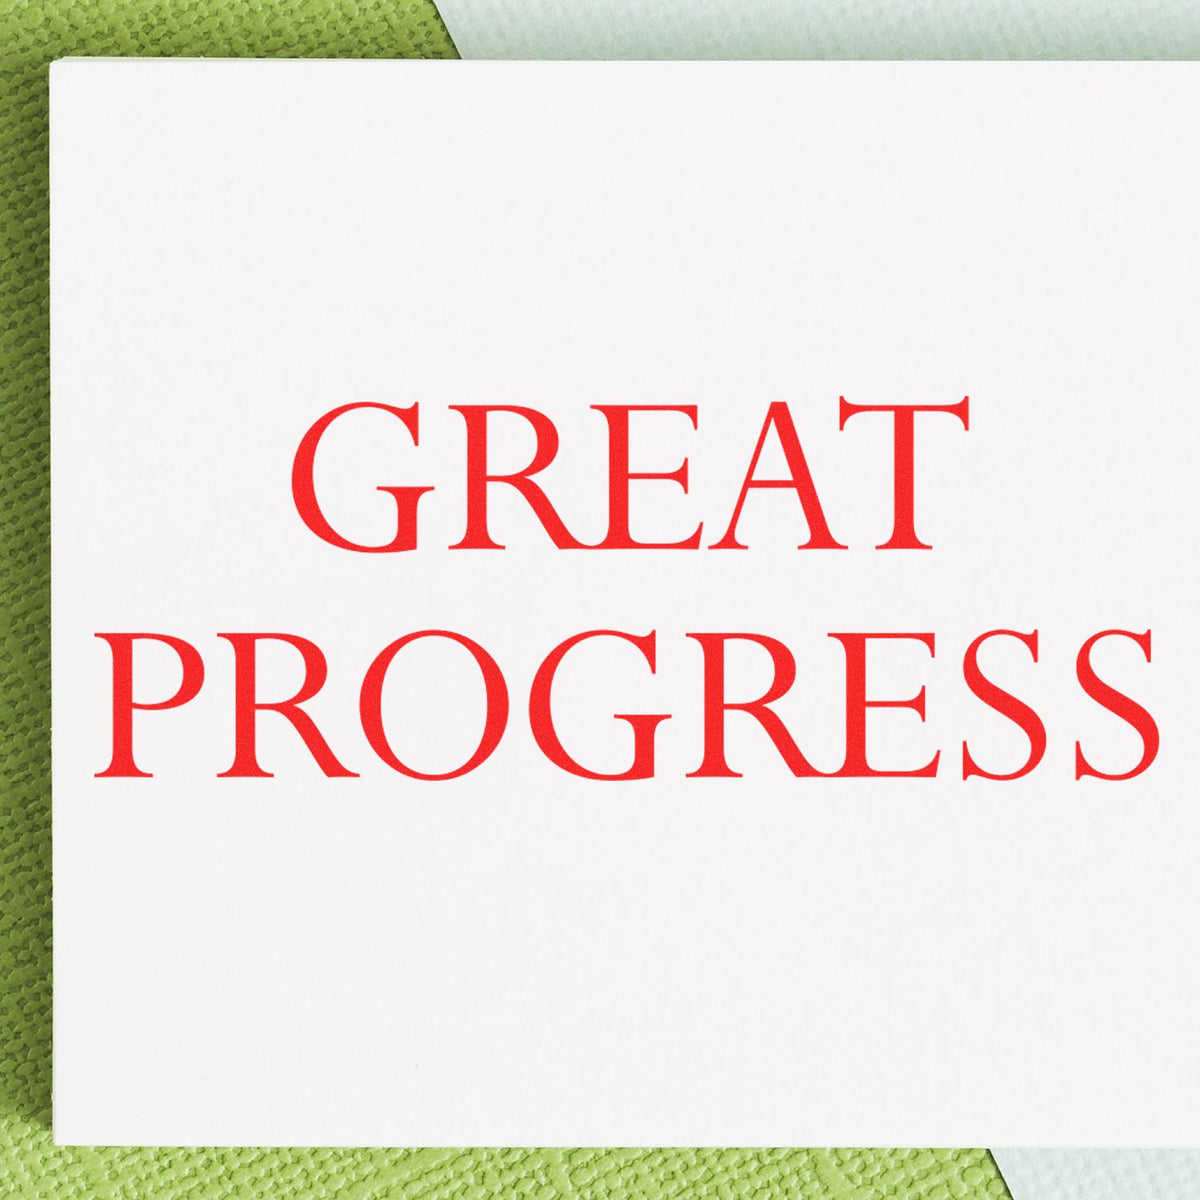 Great Progress Rubber Stamp In Use Photo